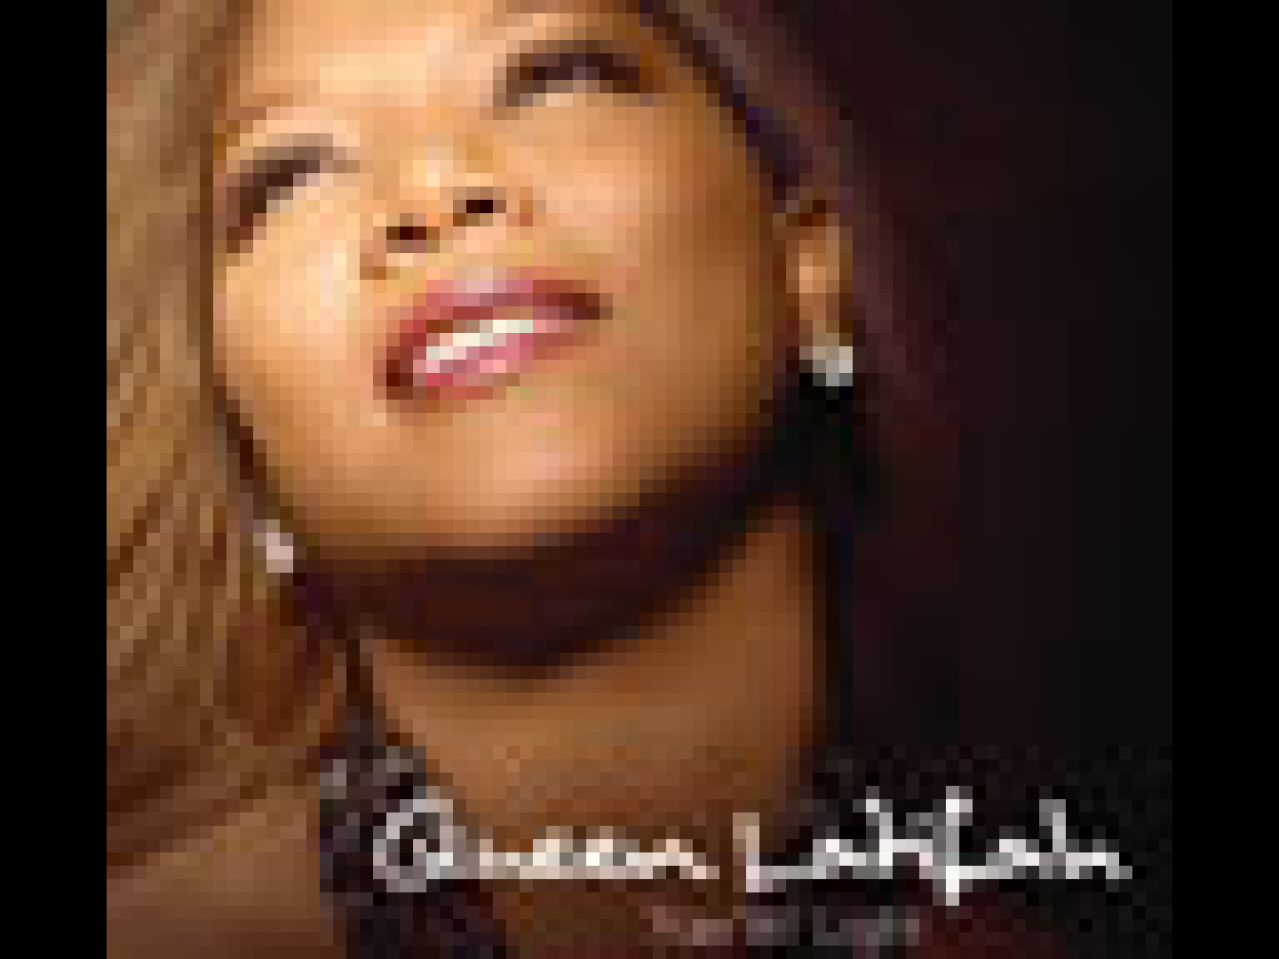 queen latifah logo Broadway shows and tickets